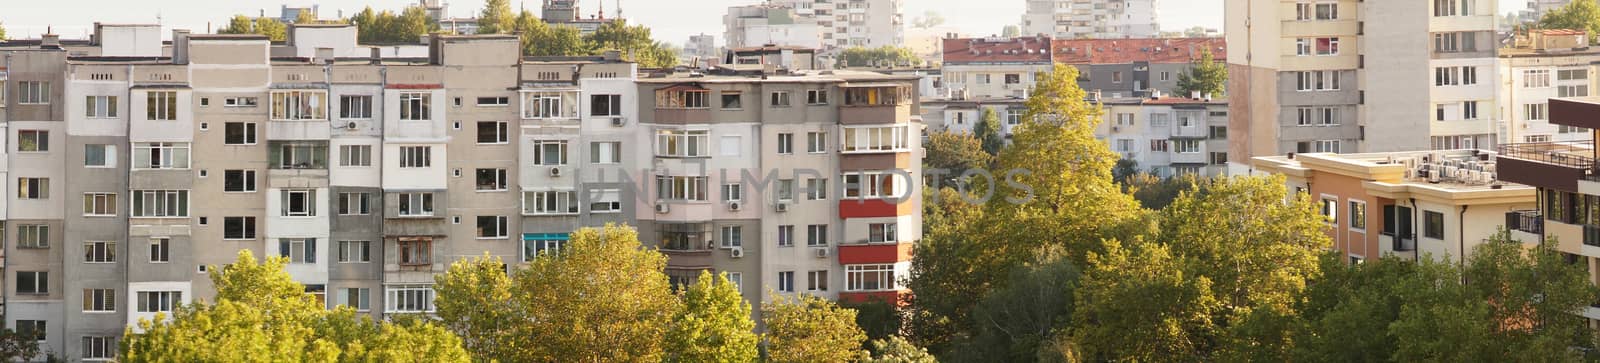 fragment of the facade of multi-storey residential buildings, panoramic photo by Annado